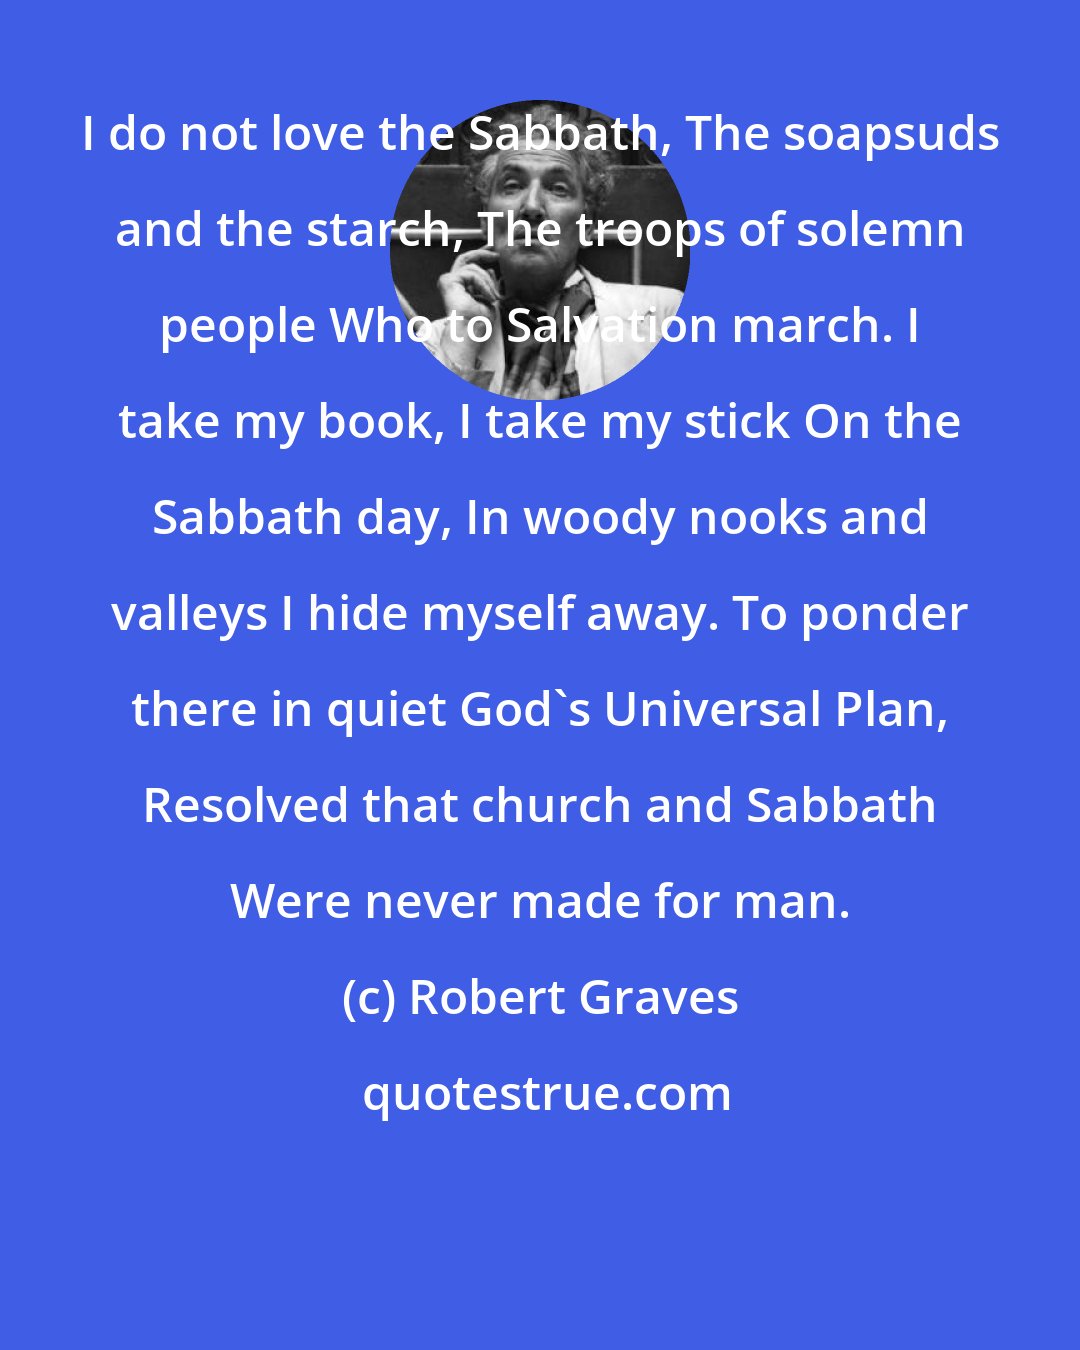 Robert Graves: I do not love the Sabbath, The soapsuds and the starch, The troops of solemn people Who to Salvation march. I take my book, I take my stick On the Sabbath day, In woody nooks and valleys I hide myself away. To ponder there in quiet God's Universal Plan, Resolved that church and Sabbath Were never made for man.